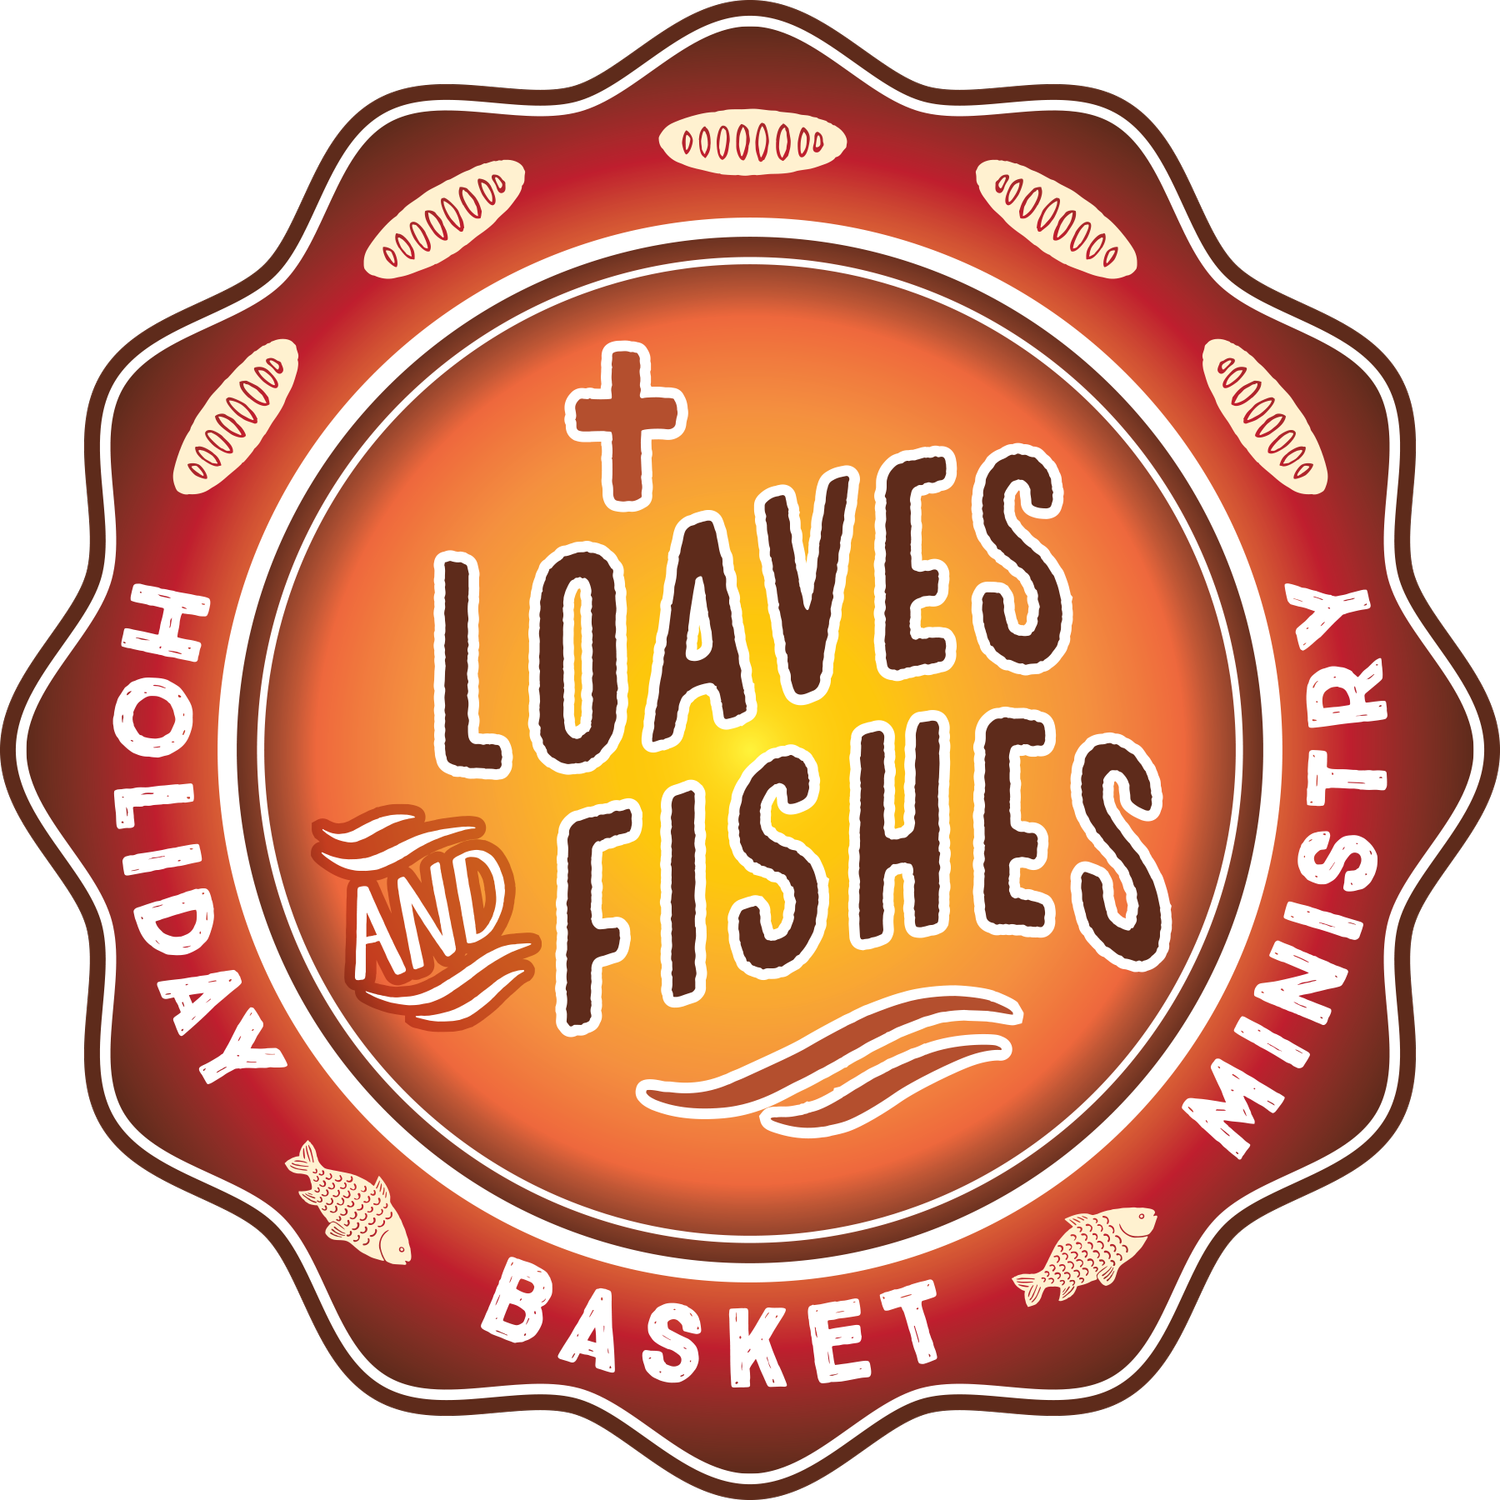 Loaves and Fishes Holiday Baskets